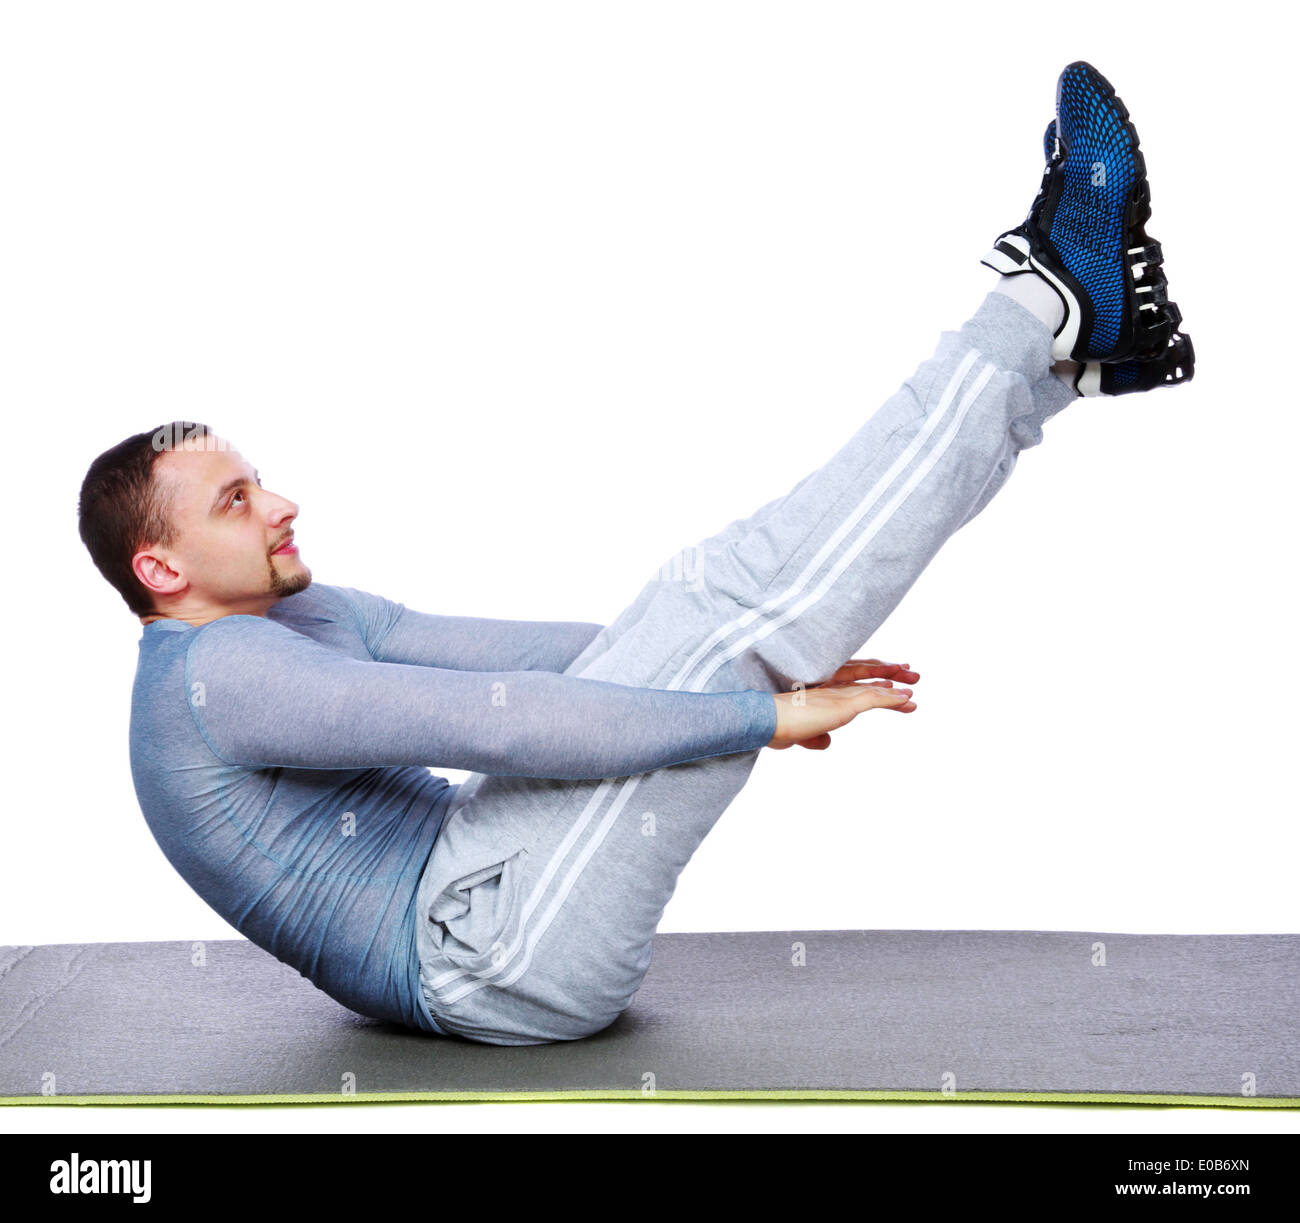 Muscular man exercising on exercise mat over white background Stock Photo